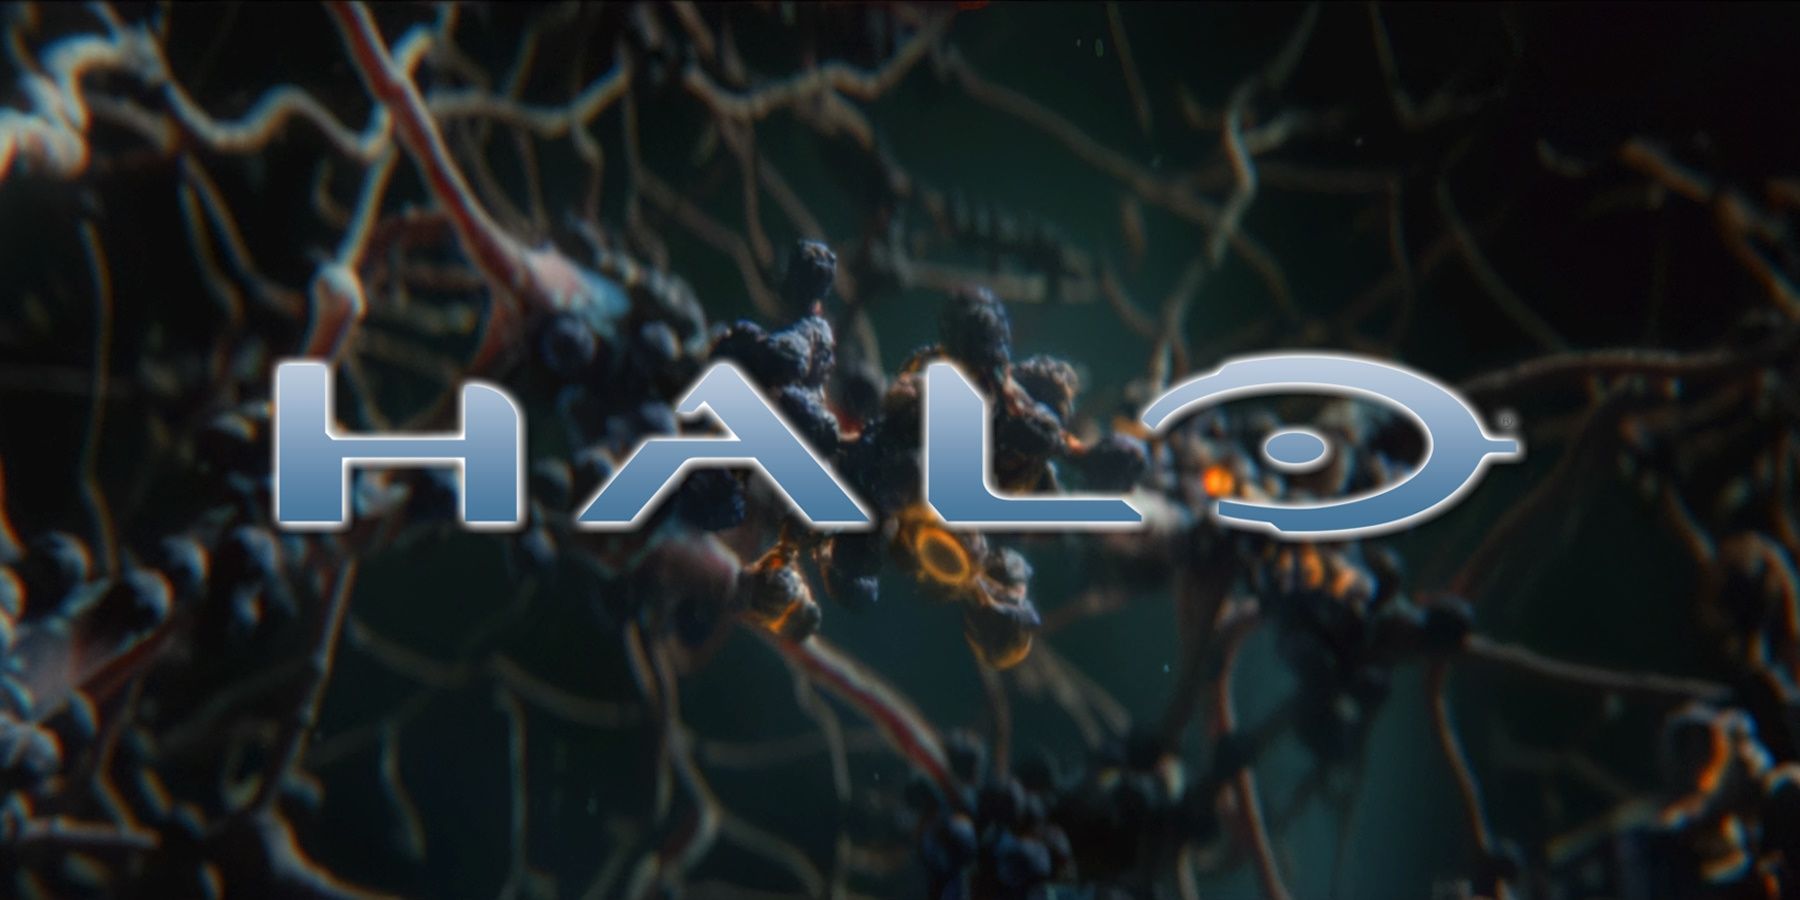 Halo logo over Flood DNA from show